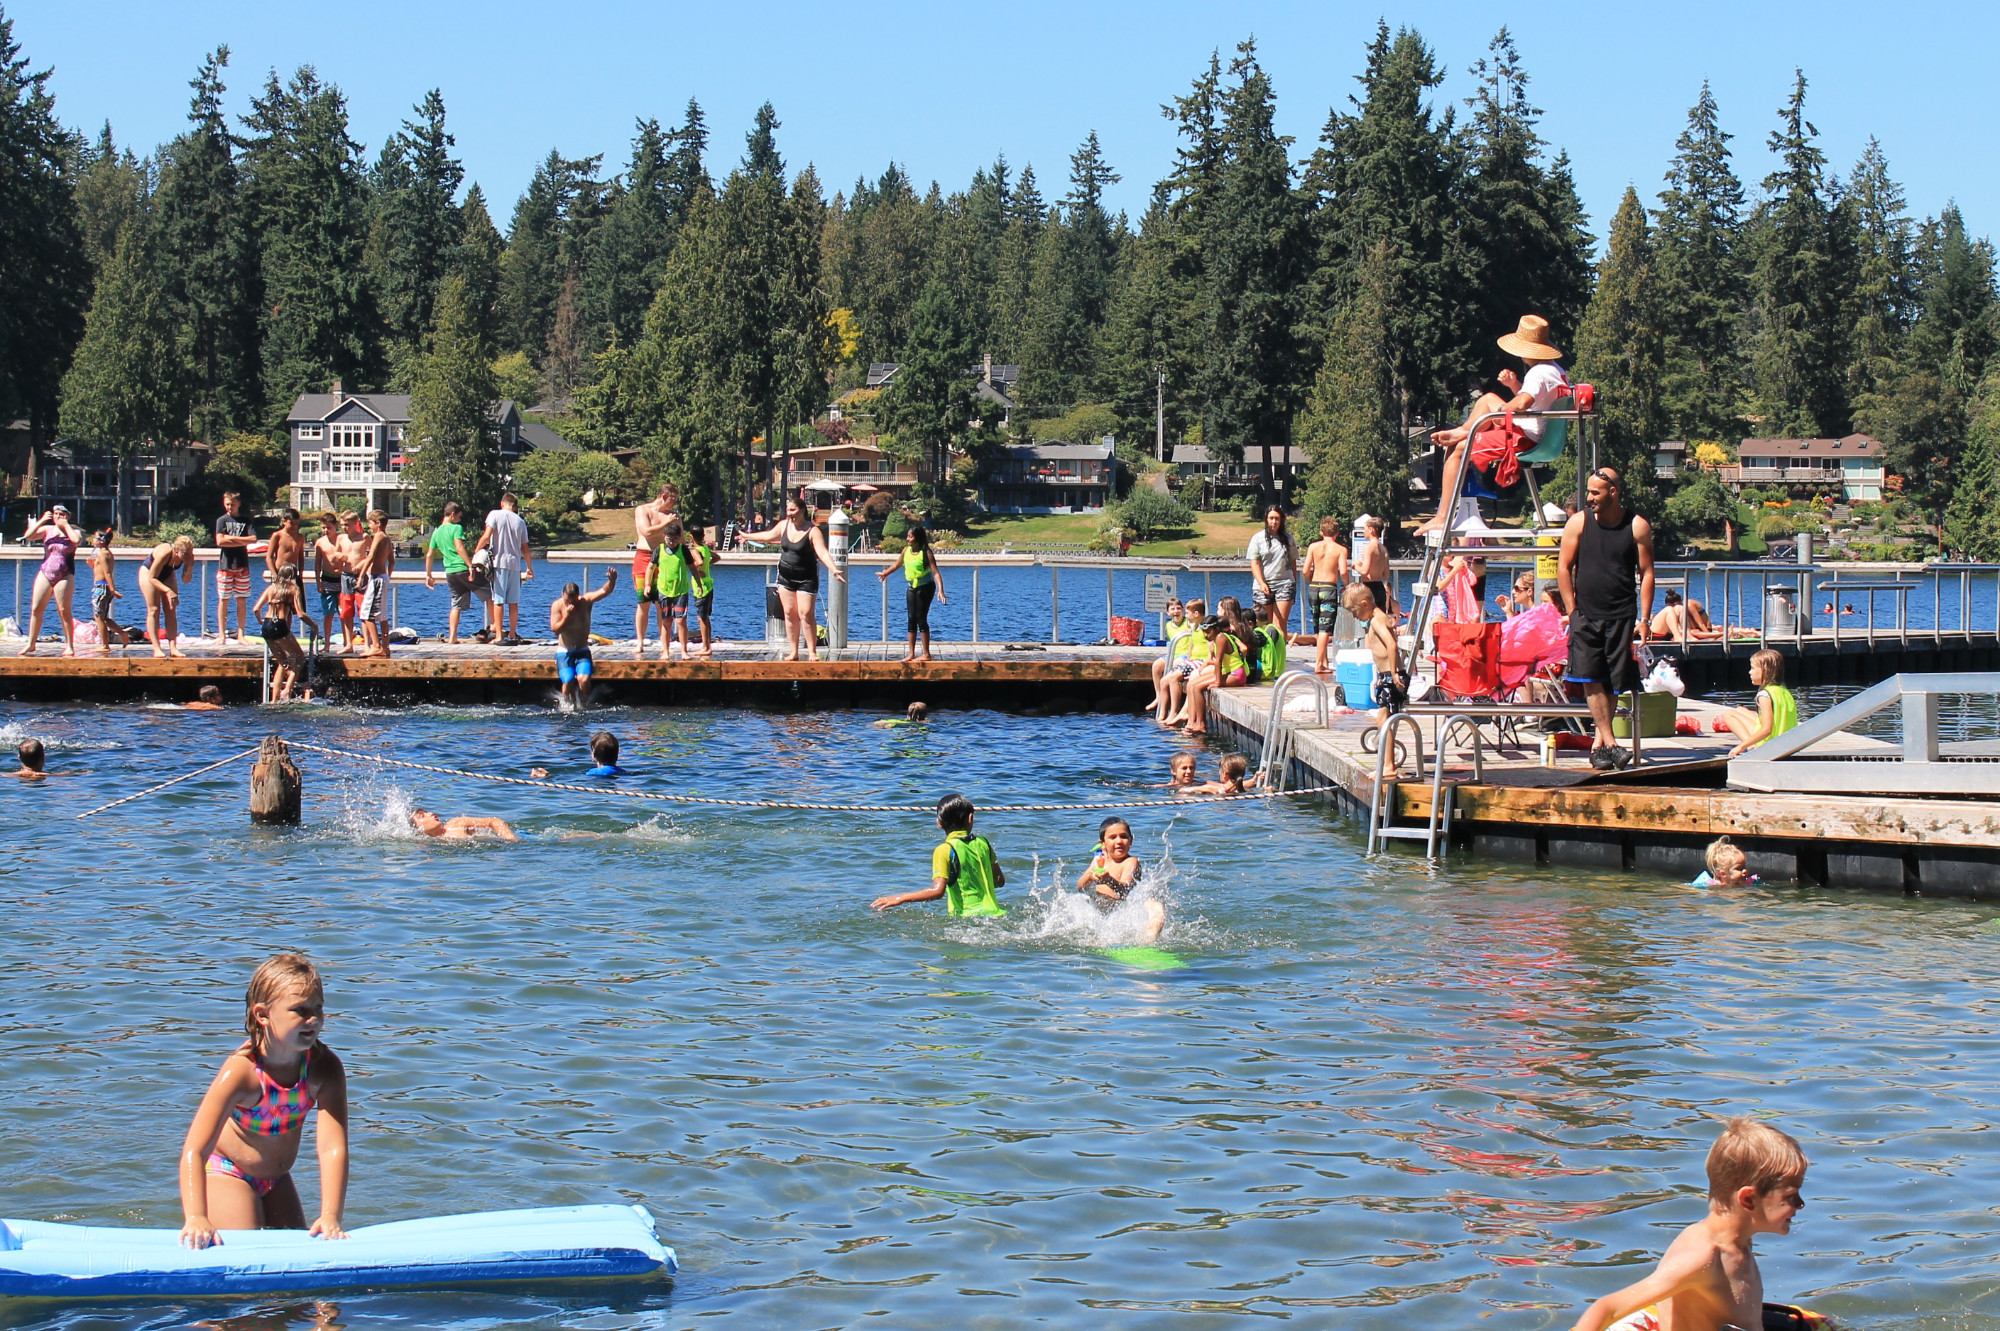 busy day at Pine Lake Park, with lots of kids wading in the shallow area and people swimming while a lifeguard watches from the dock